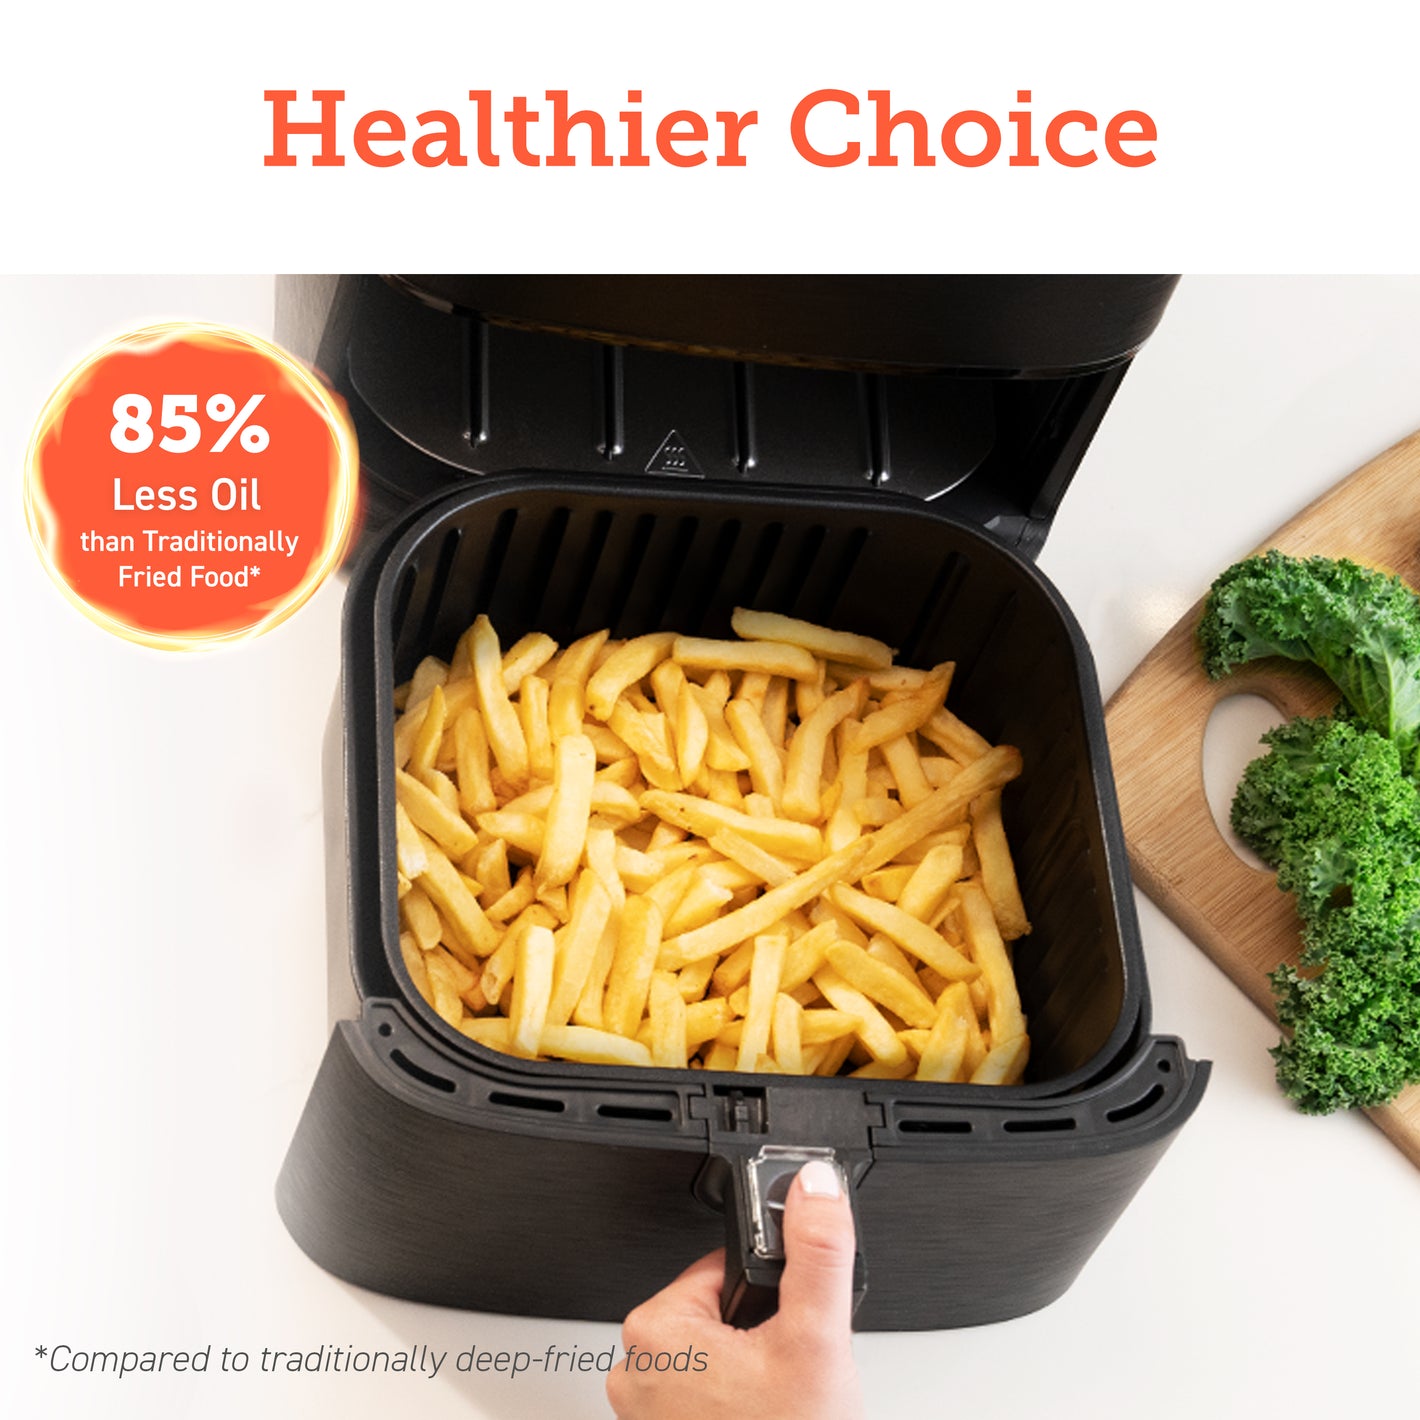 Healthier Choice 85% Less Oil than Traditonally Fried Food* *Compared to traditionally deep-fried food